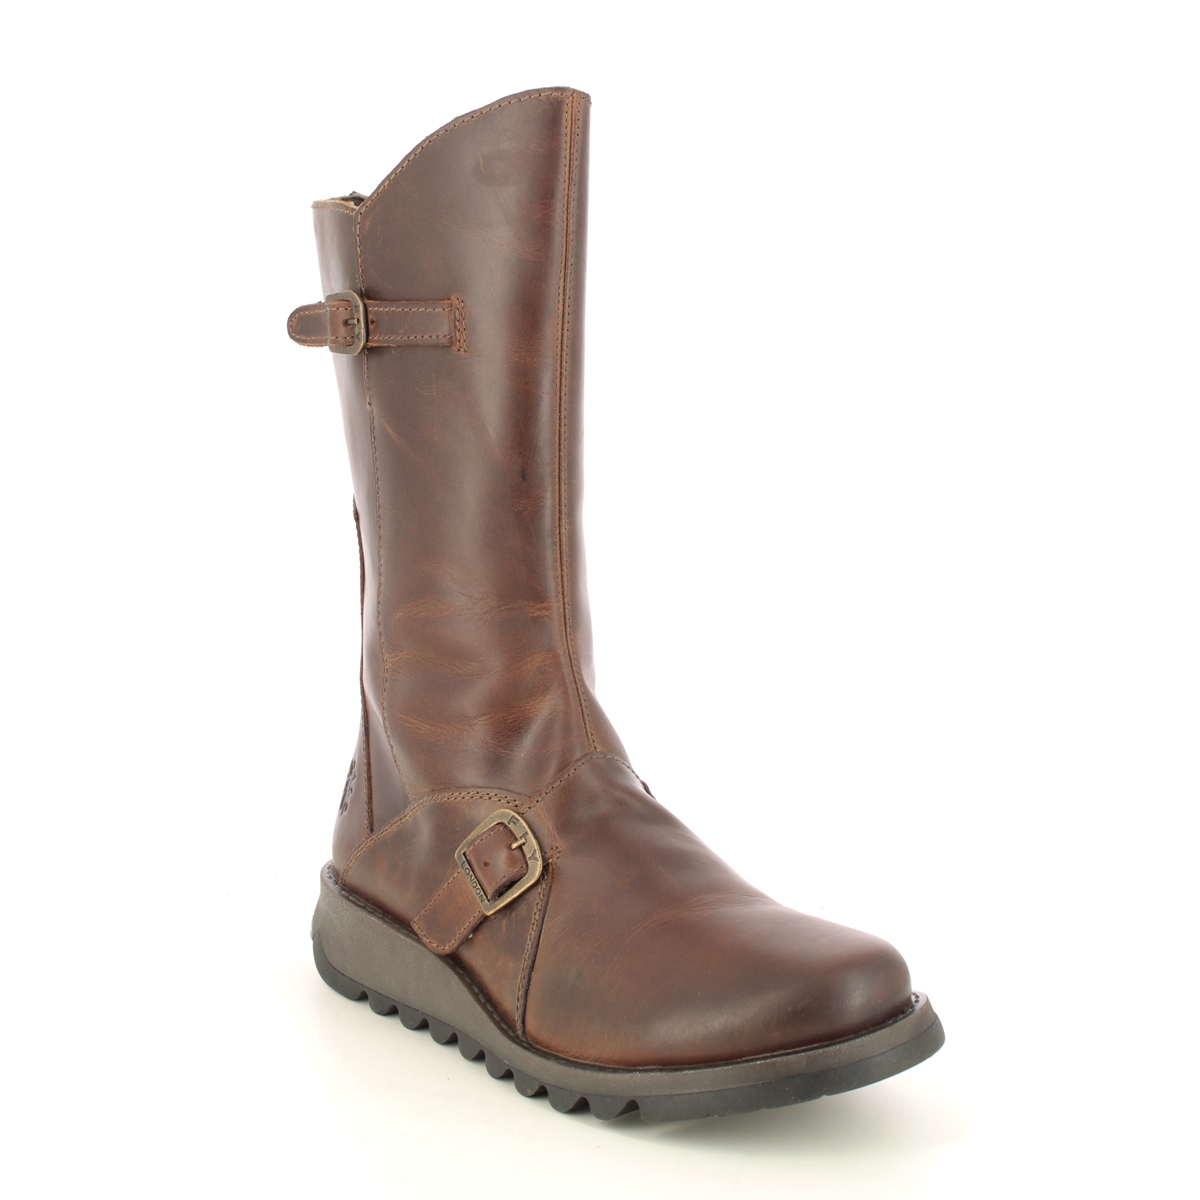 Fly London Mes 2 Camel Womens Mid Calf Boots P142913-003 in a Plain Leather in Size 41